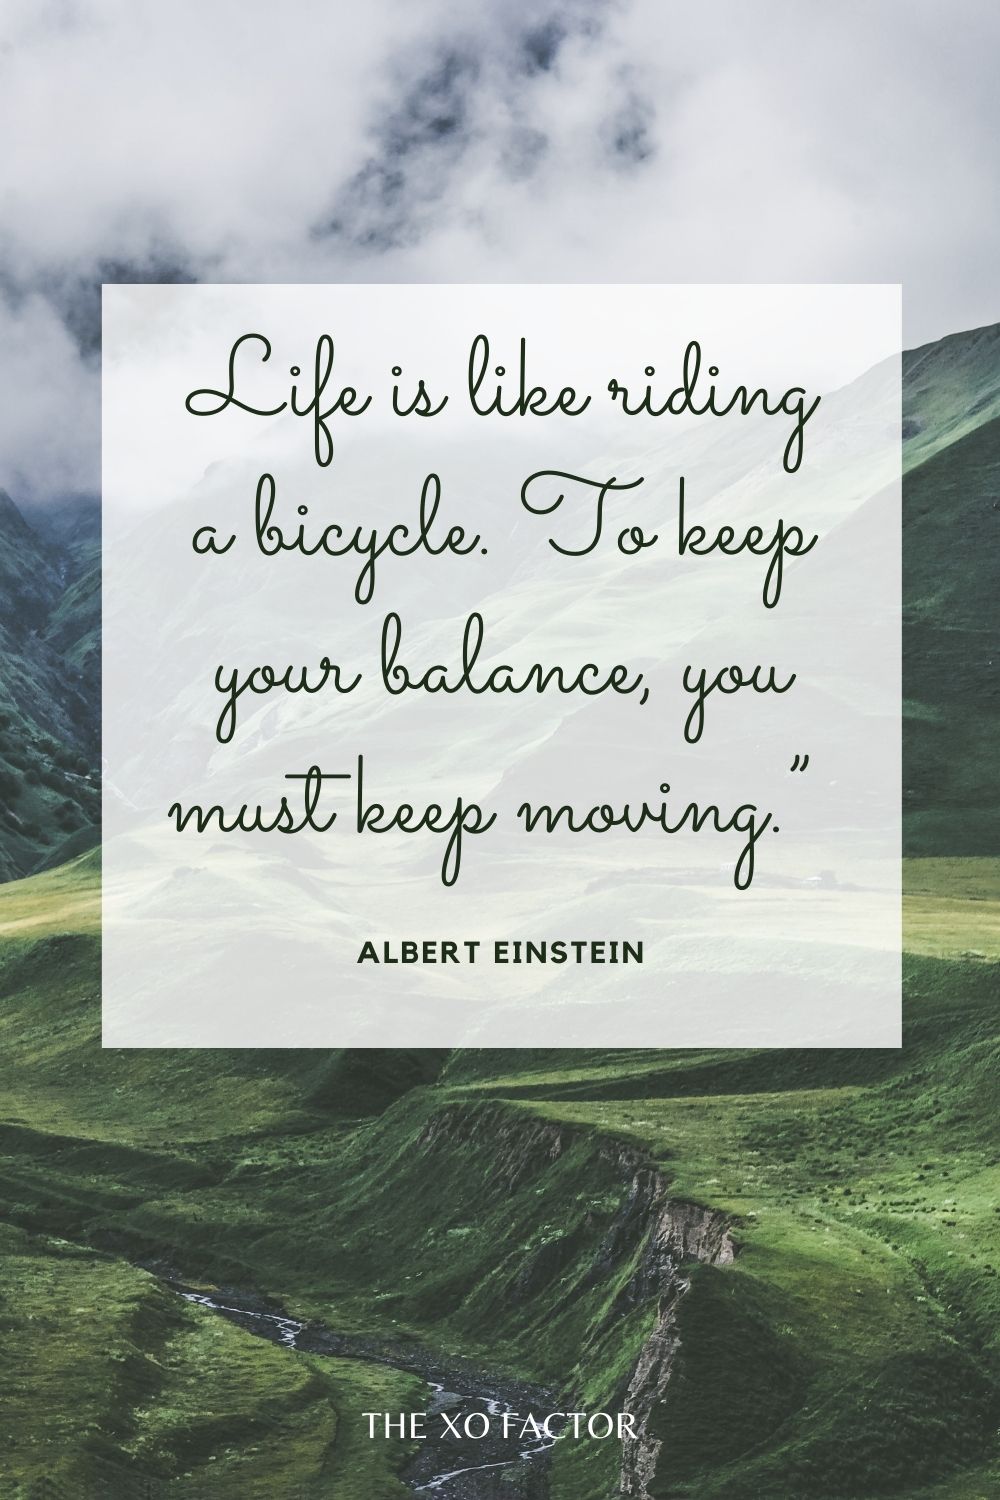 Life is like riding a bicycle. To keep your balance, you must keep moving.”  Albert Einstein